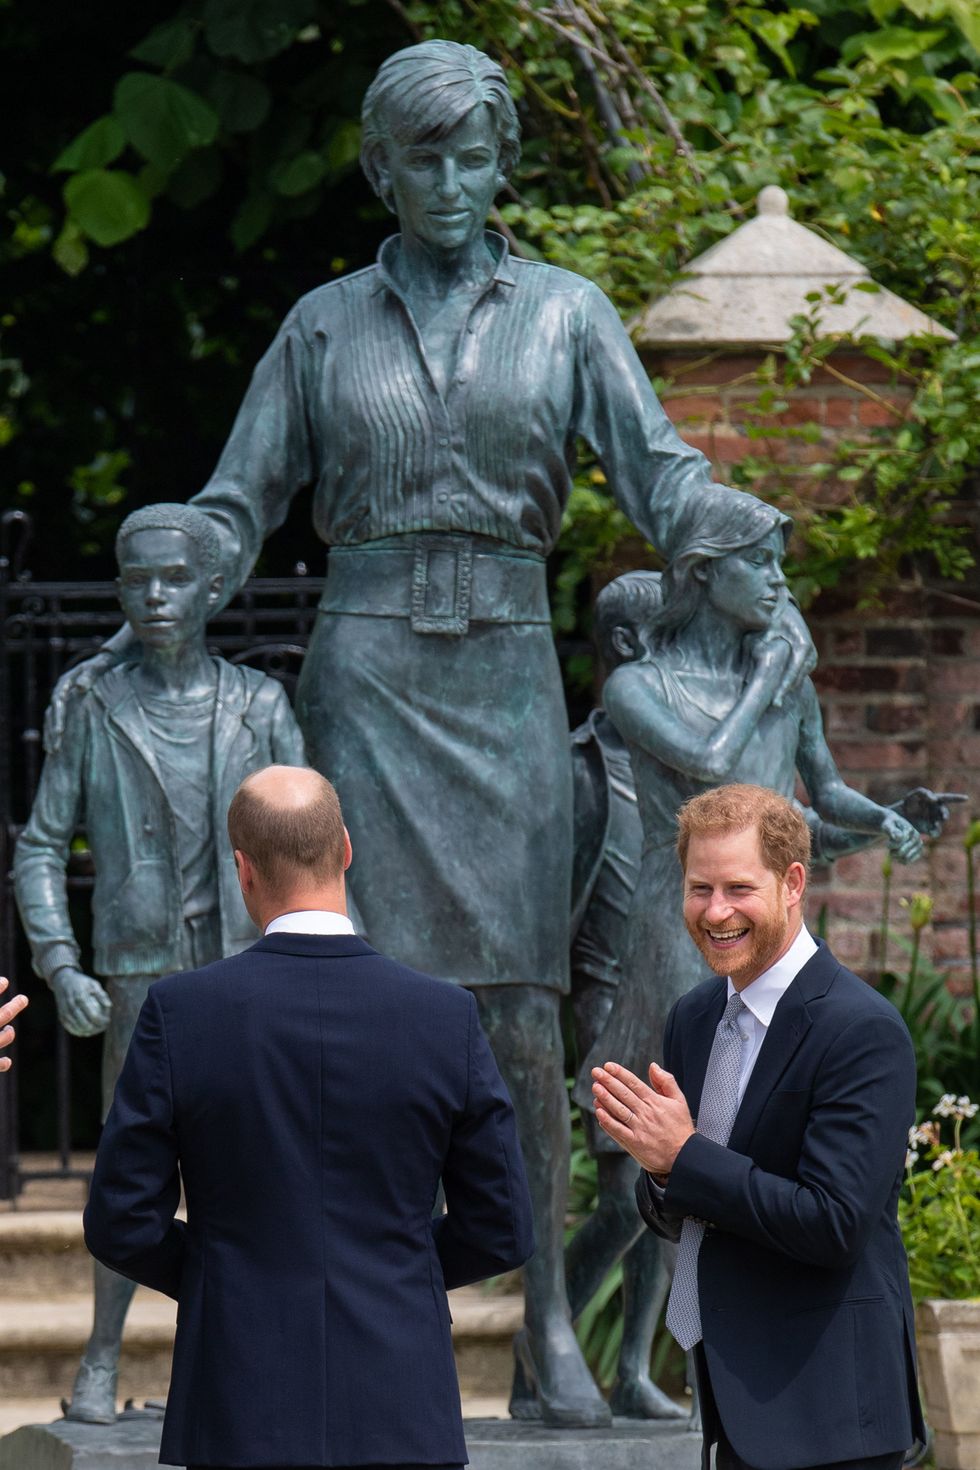 london, england   july 01 prince william, duke of cambridge left and prince harry, duke of sussex unveil a statue they commissioned of their mother diana, princess of wales, in the sunken garden at kensington palace, on what would have been her 60th birthday on july 1, 2021 in london, england today would have been the 60th birthday of princess diana, who died in 1997 at a ceremony here today, her sons prince william and prince harry, the duke of cambridge and the duke of sussex respectively, will unveil a statue in her memory photo by dominic lipinski   wpa poolgetty images